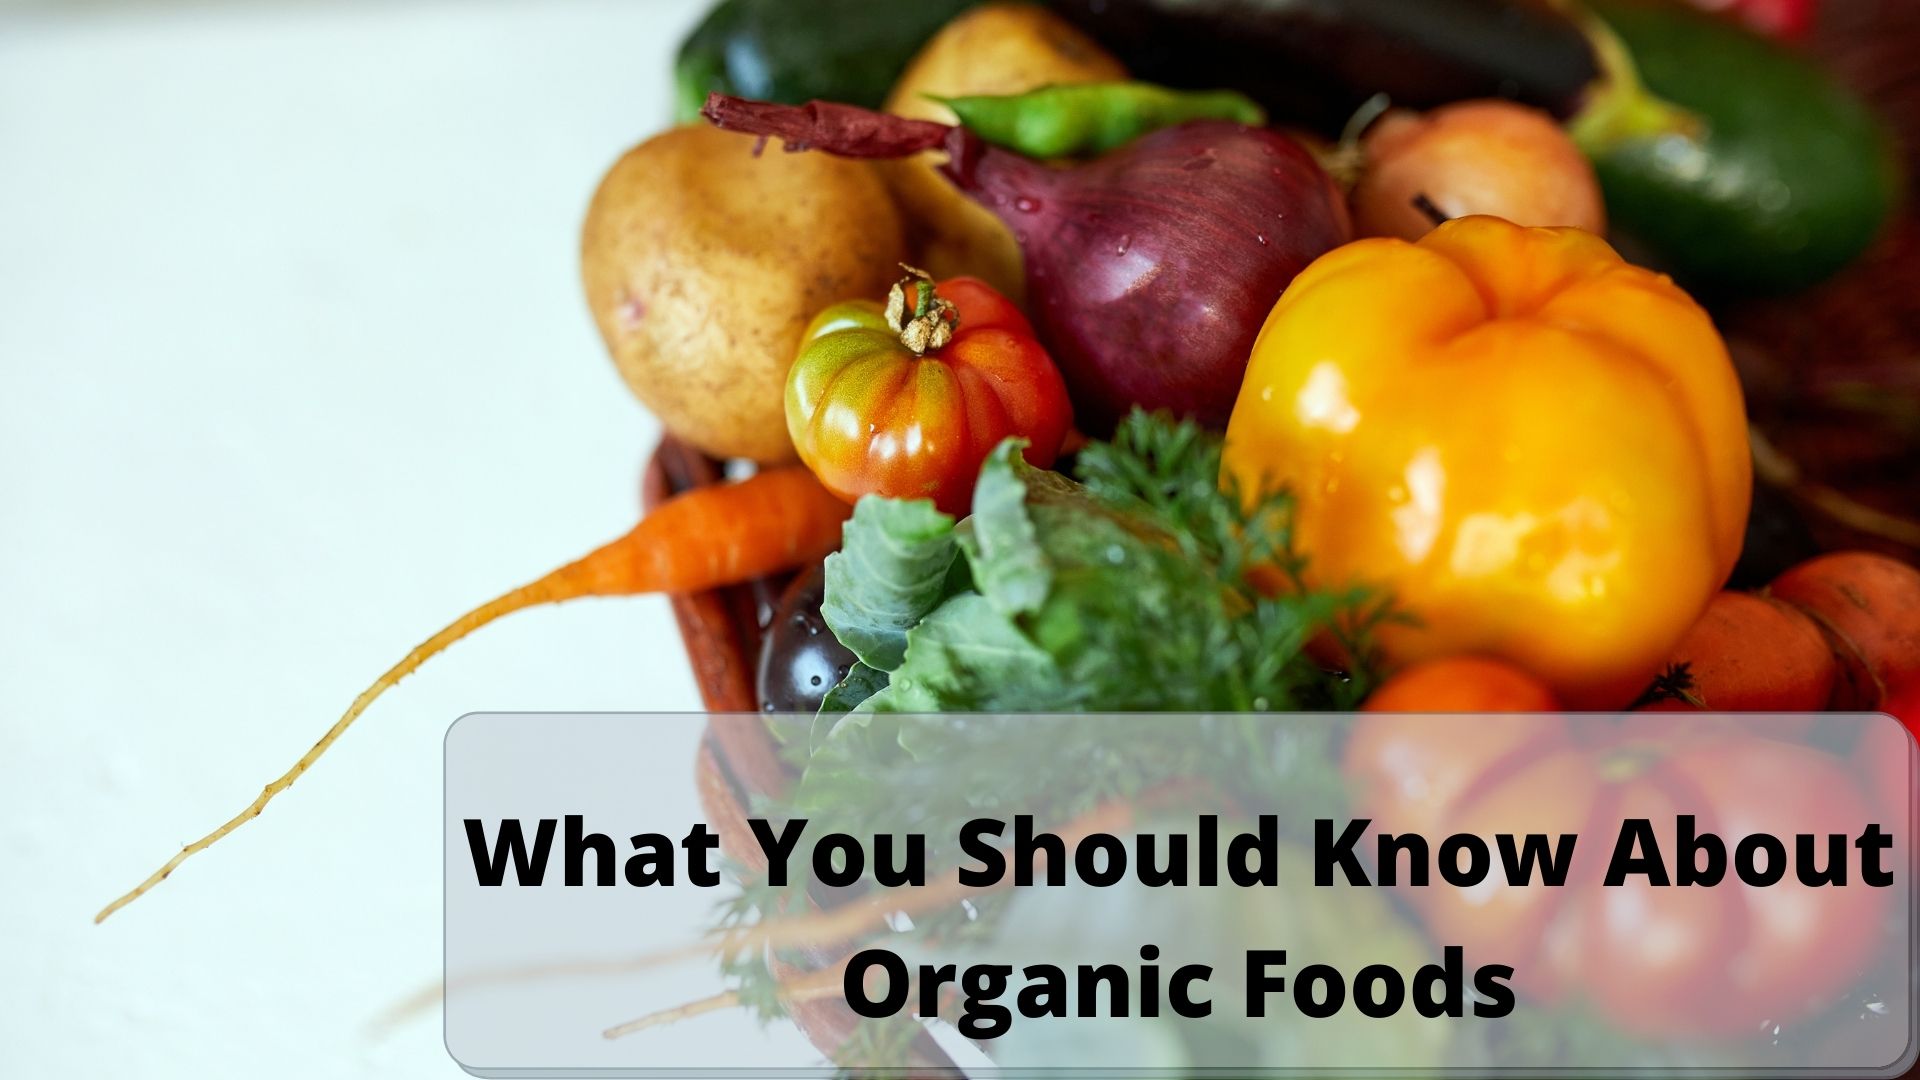 What You Should Know About Organic Foods